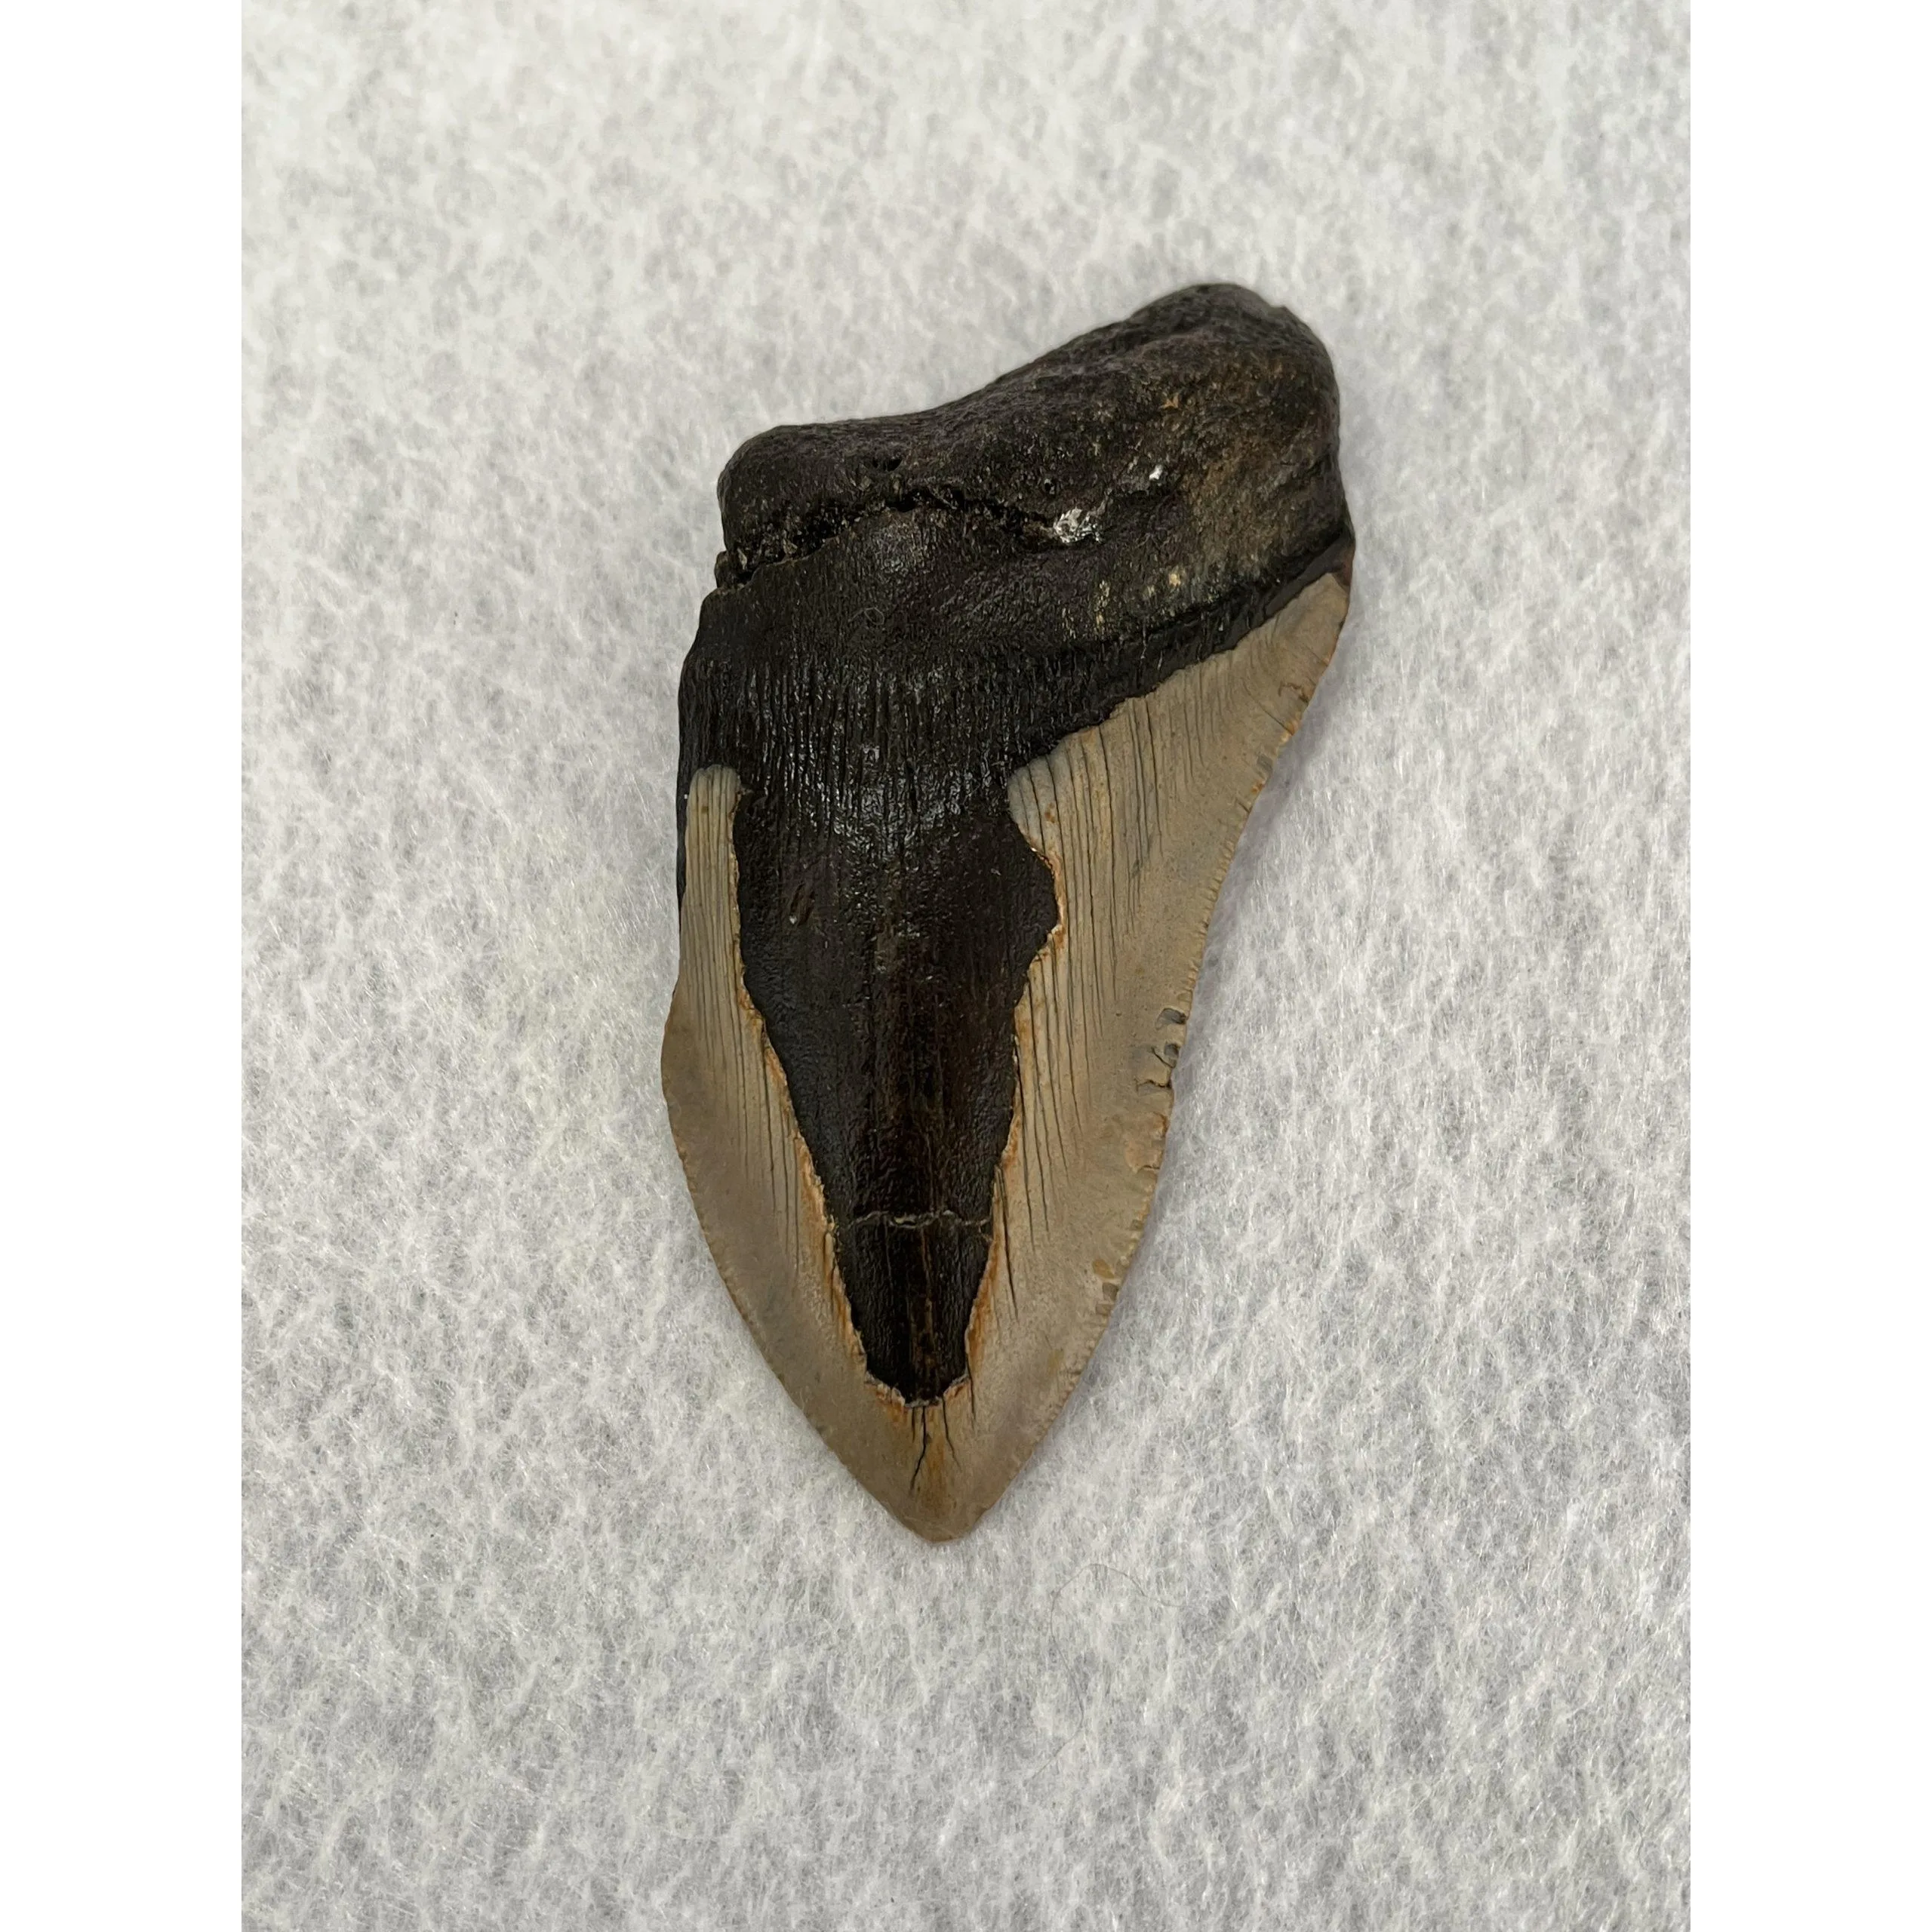 Megalodon Partial Tooth,  South Carolina, 4.67 inch Prehistoric Online